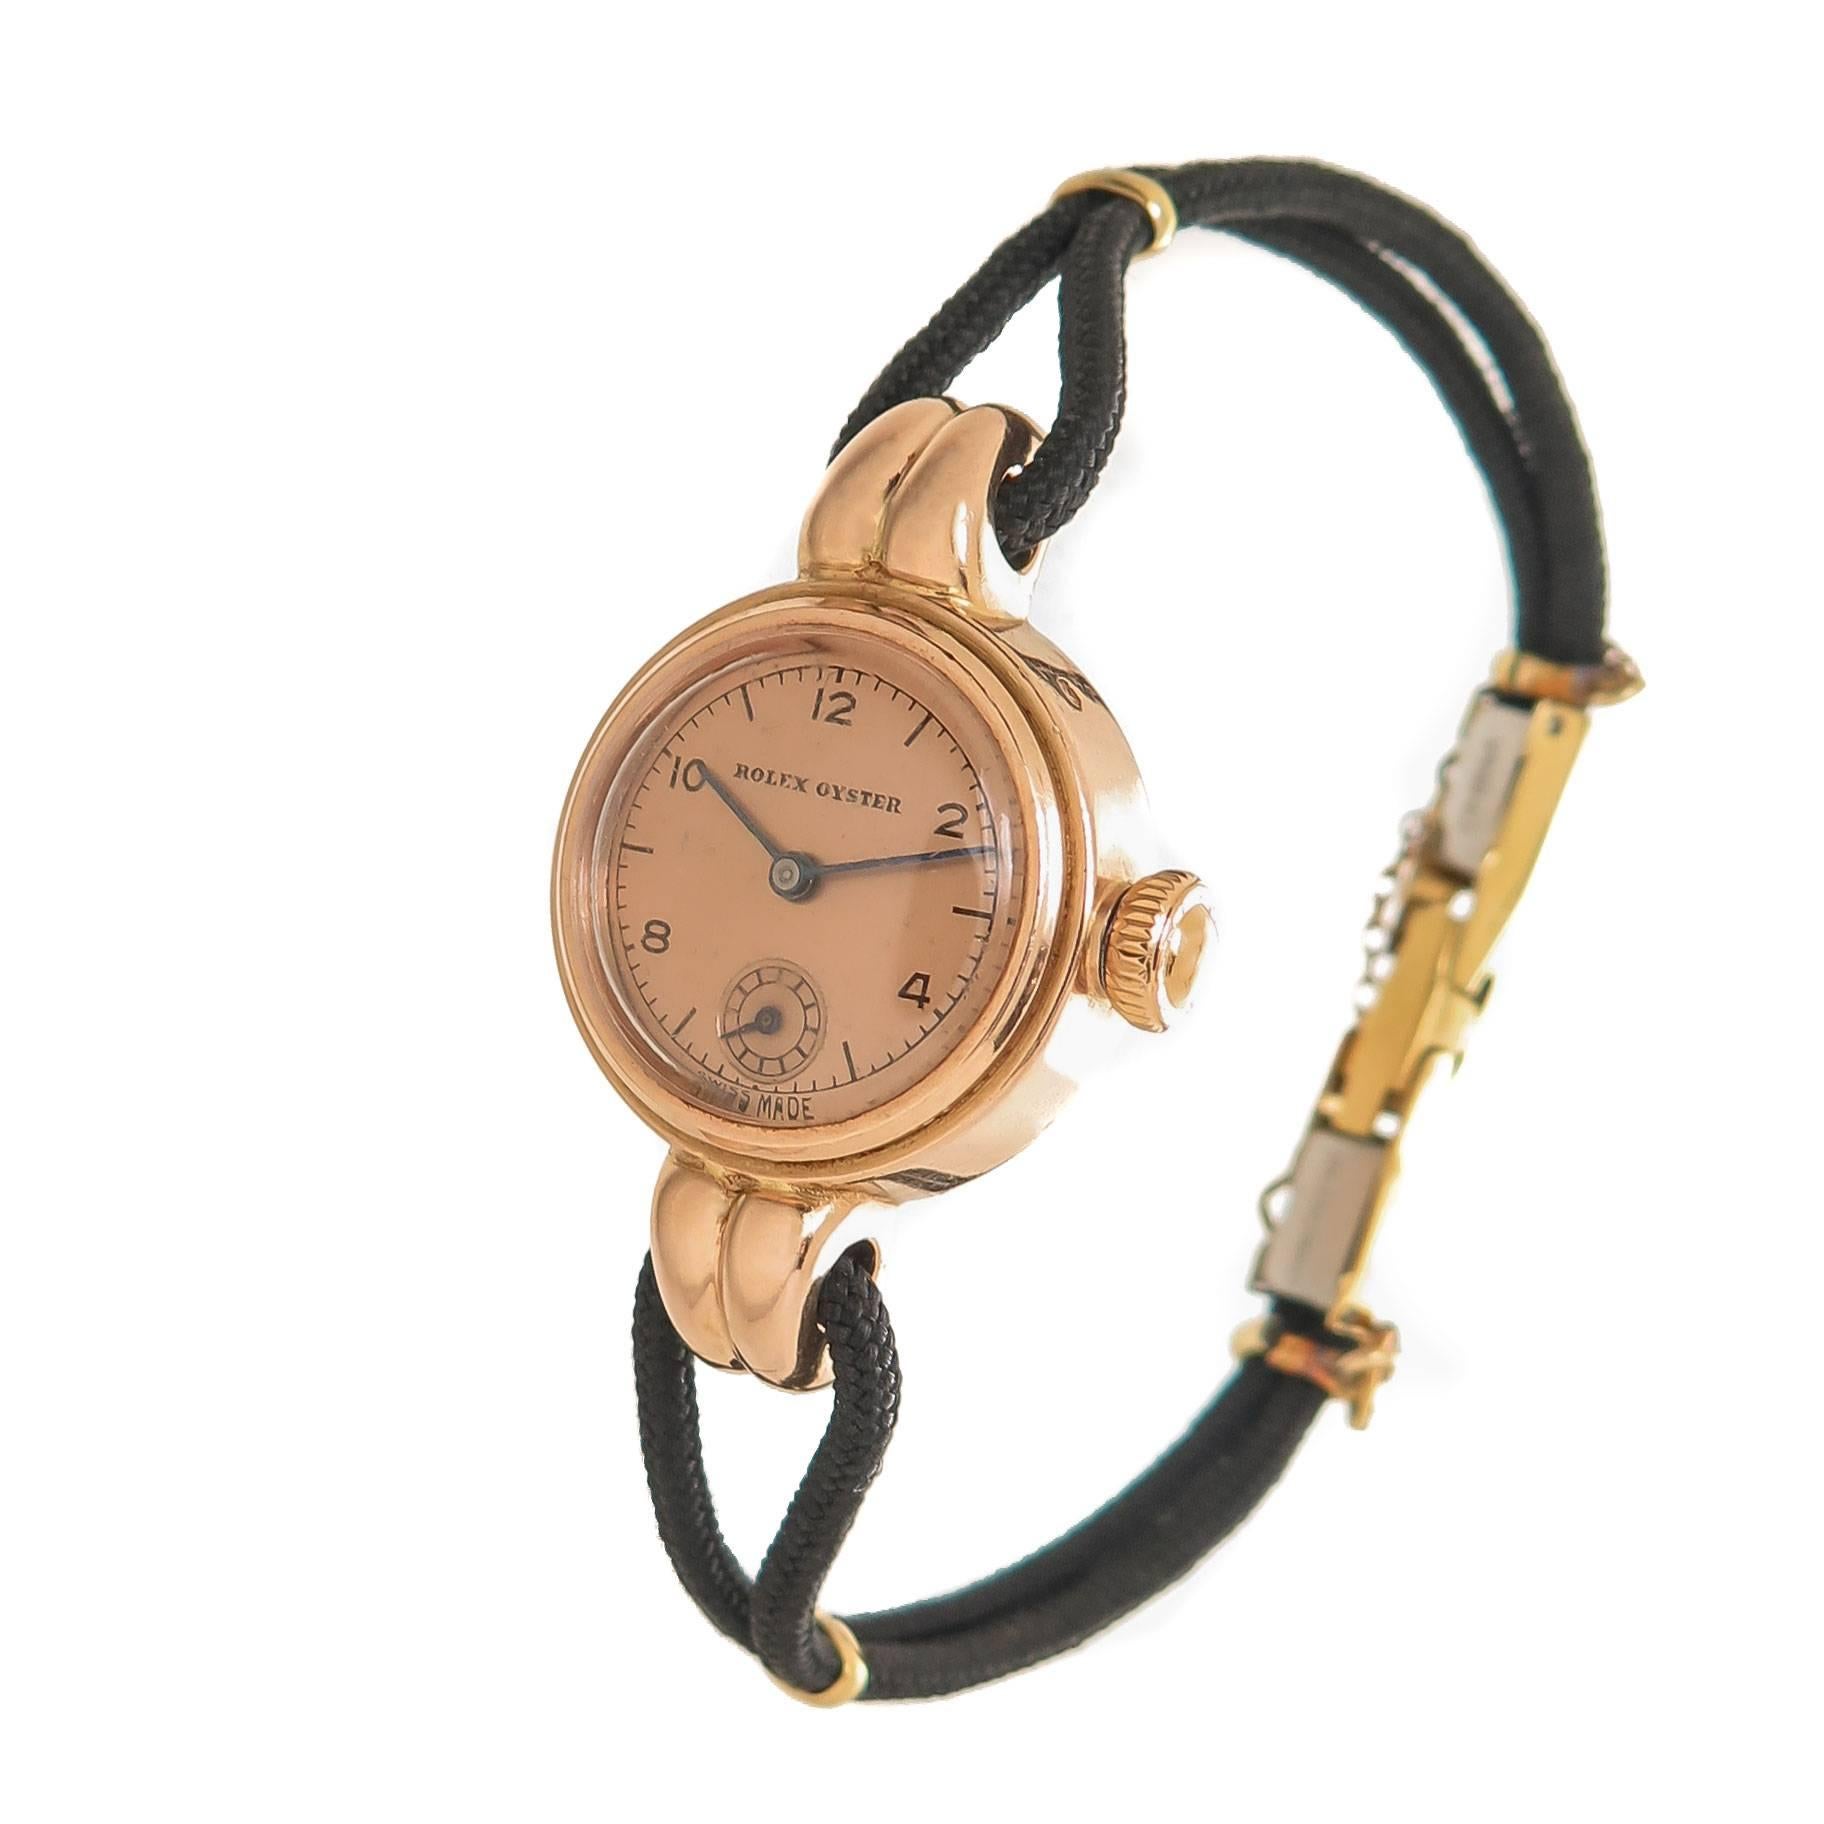 Circa 1940s Rolex 14K Rose Gold Ladies Wrist watch, 21 MM Diameter and 7 MM thick 2 piece Oyster Case. 17 Jewel Mechanical, Manual wind movement. Original Rose Gold Rolex Screw down Crown and original Rose Dial with sub seconds chapter. New Black